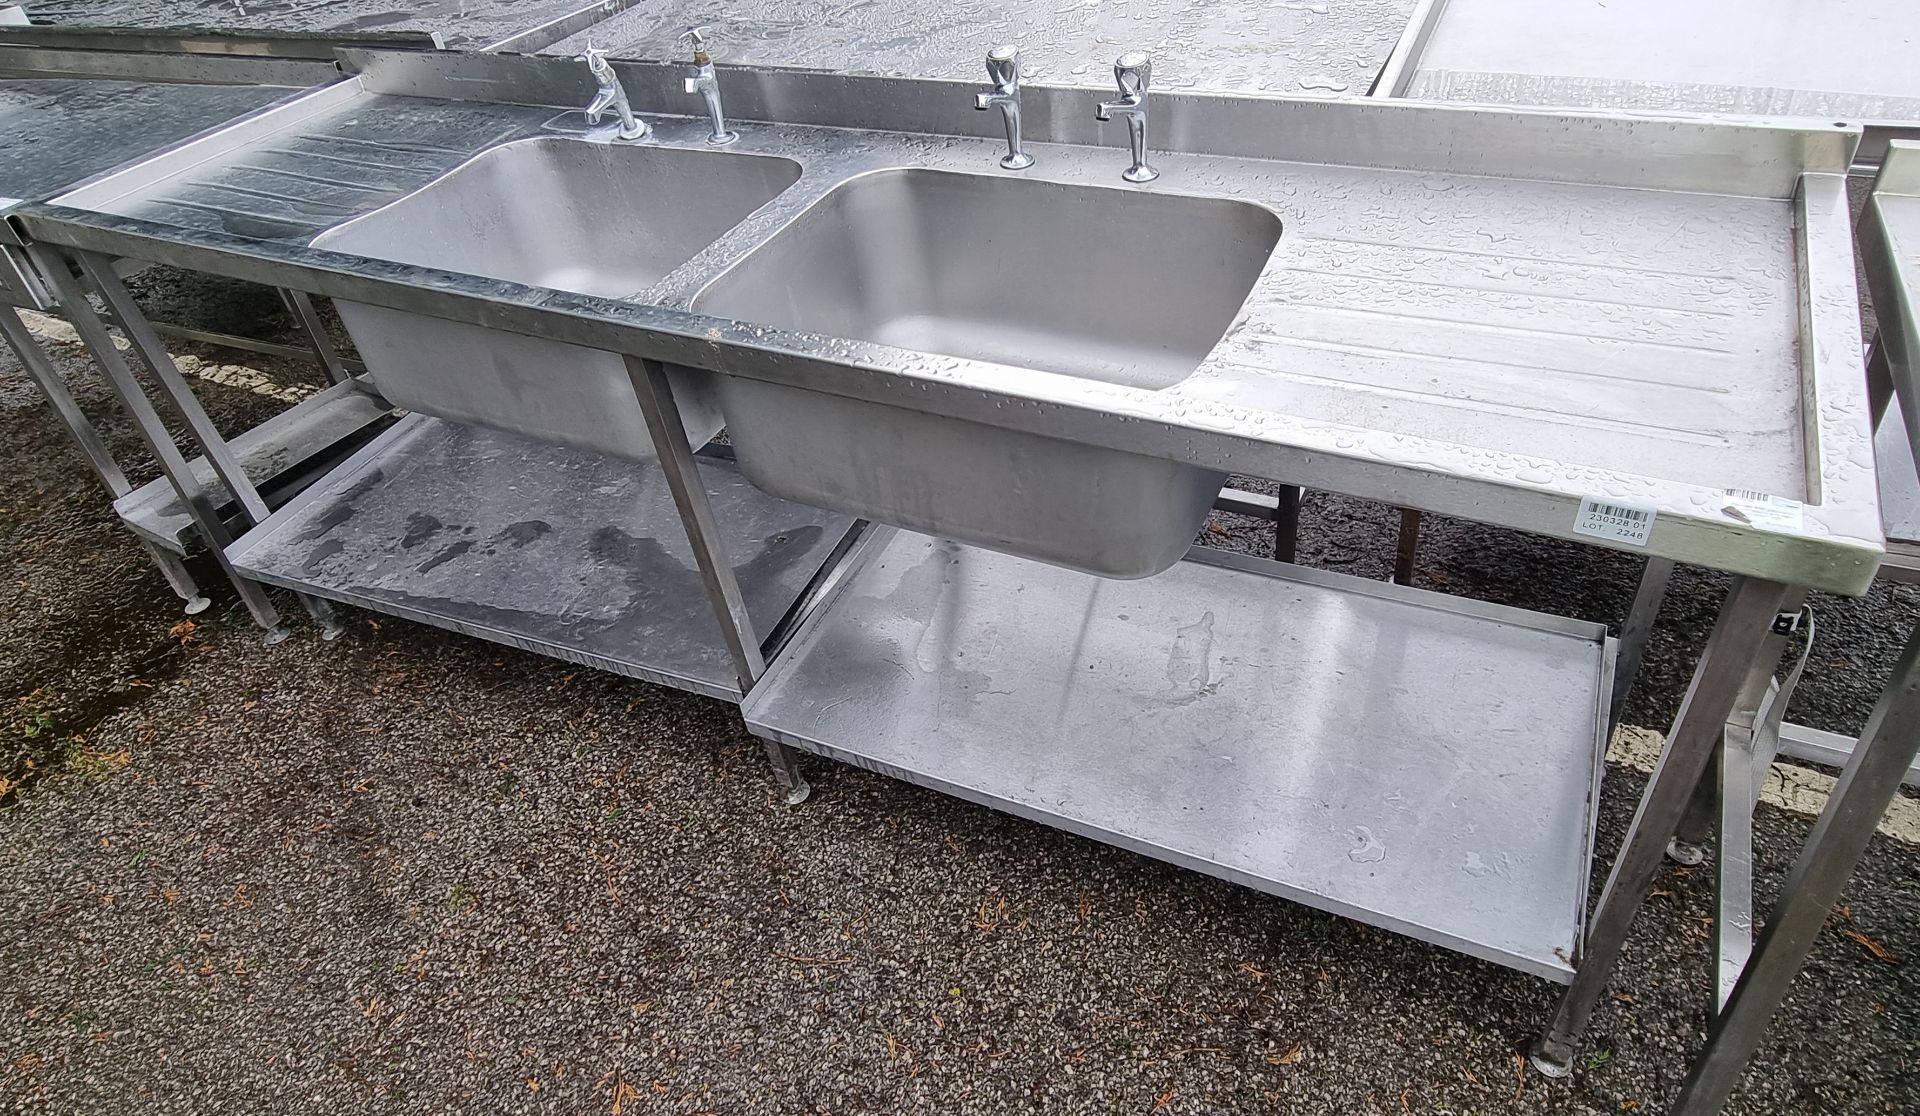 Stainless steel preparation table with double sink basin - 240 x 66 x 111cm